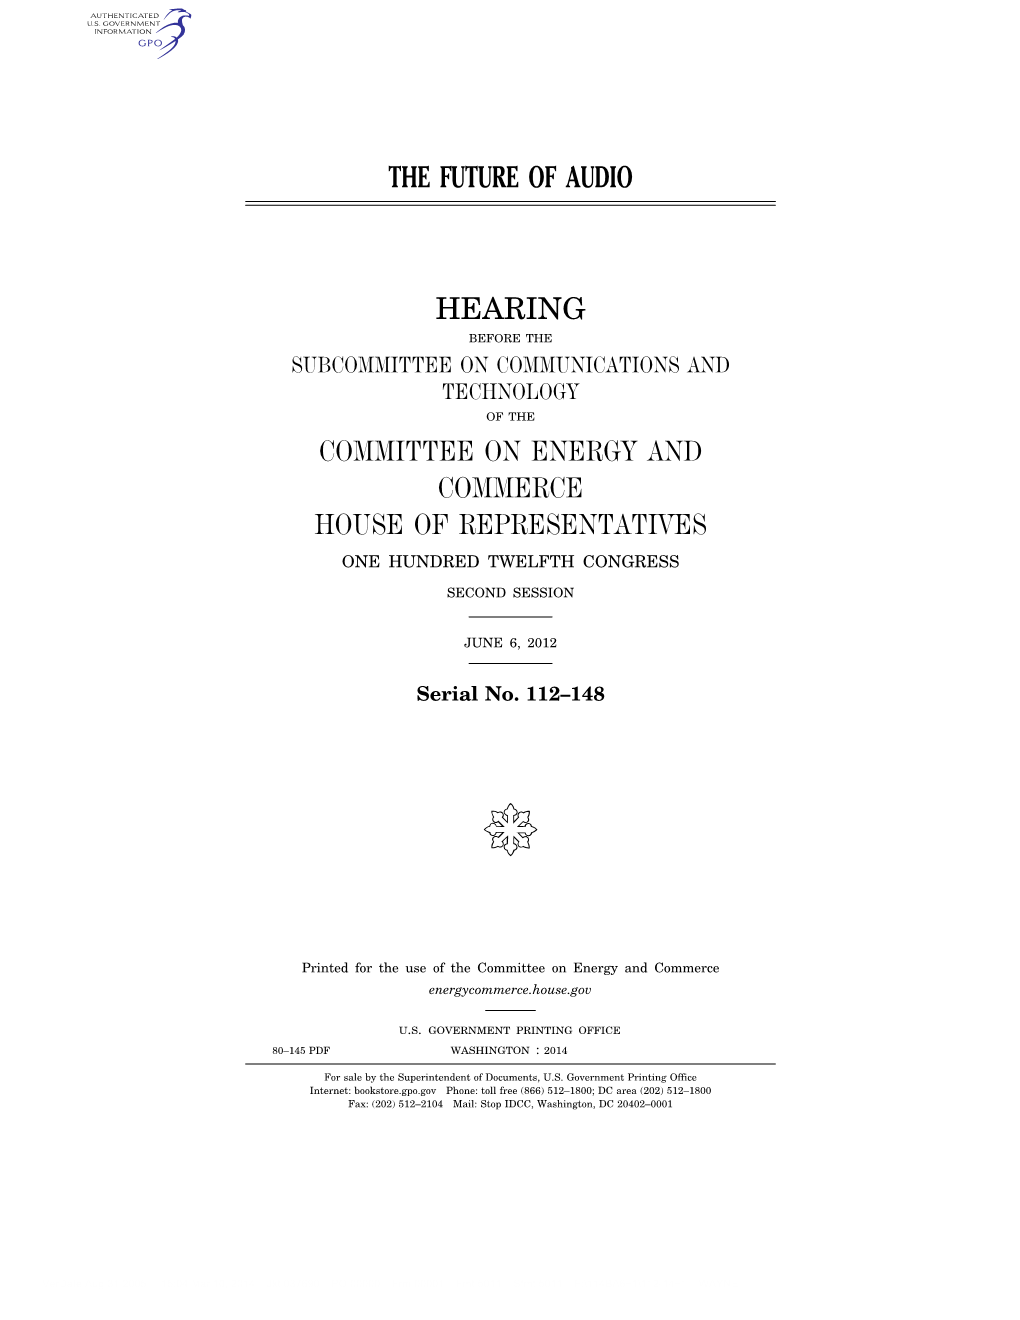 The Future of Audio Hearing Committee on Energy And